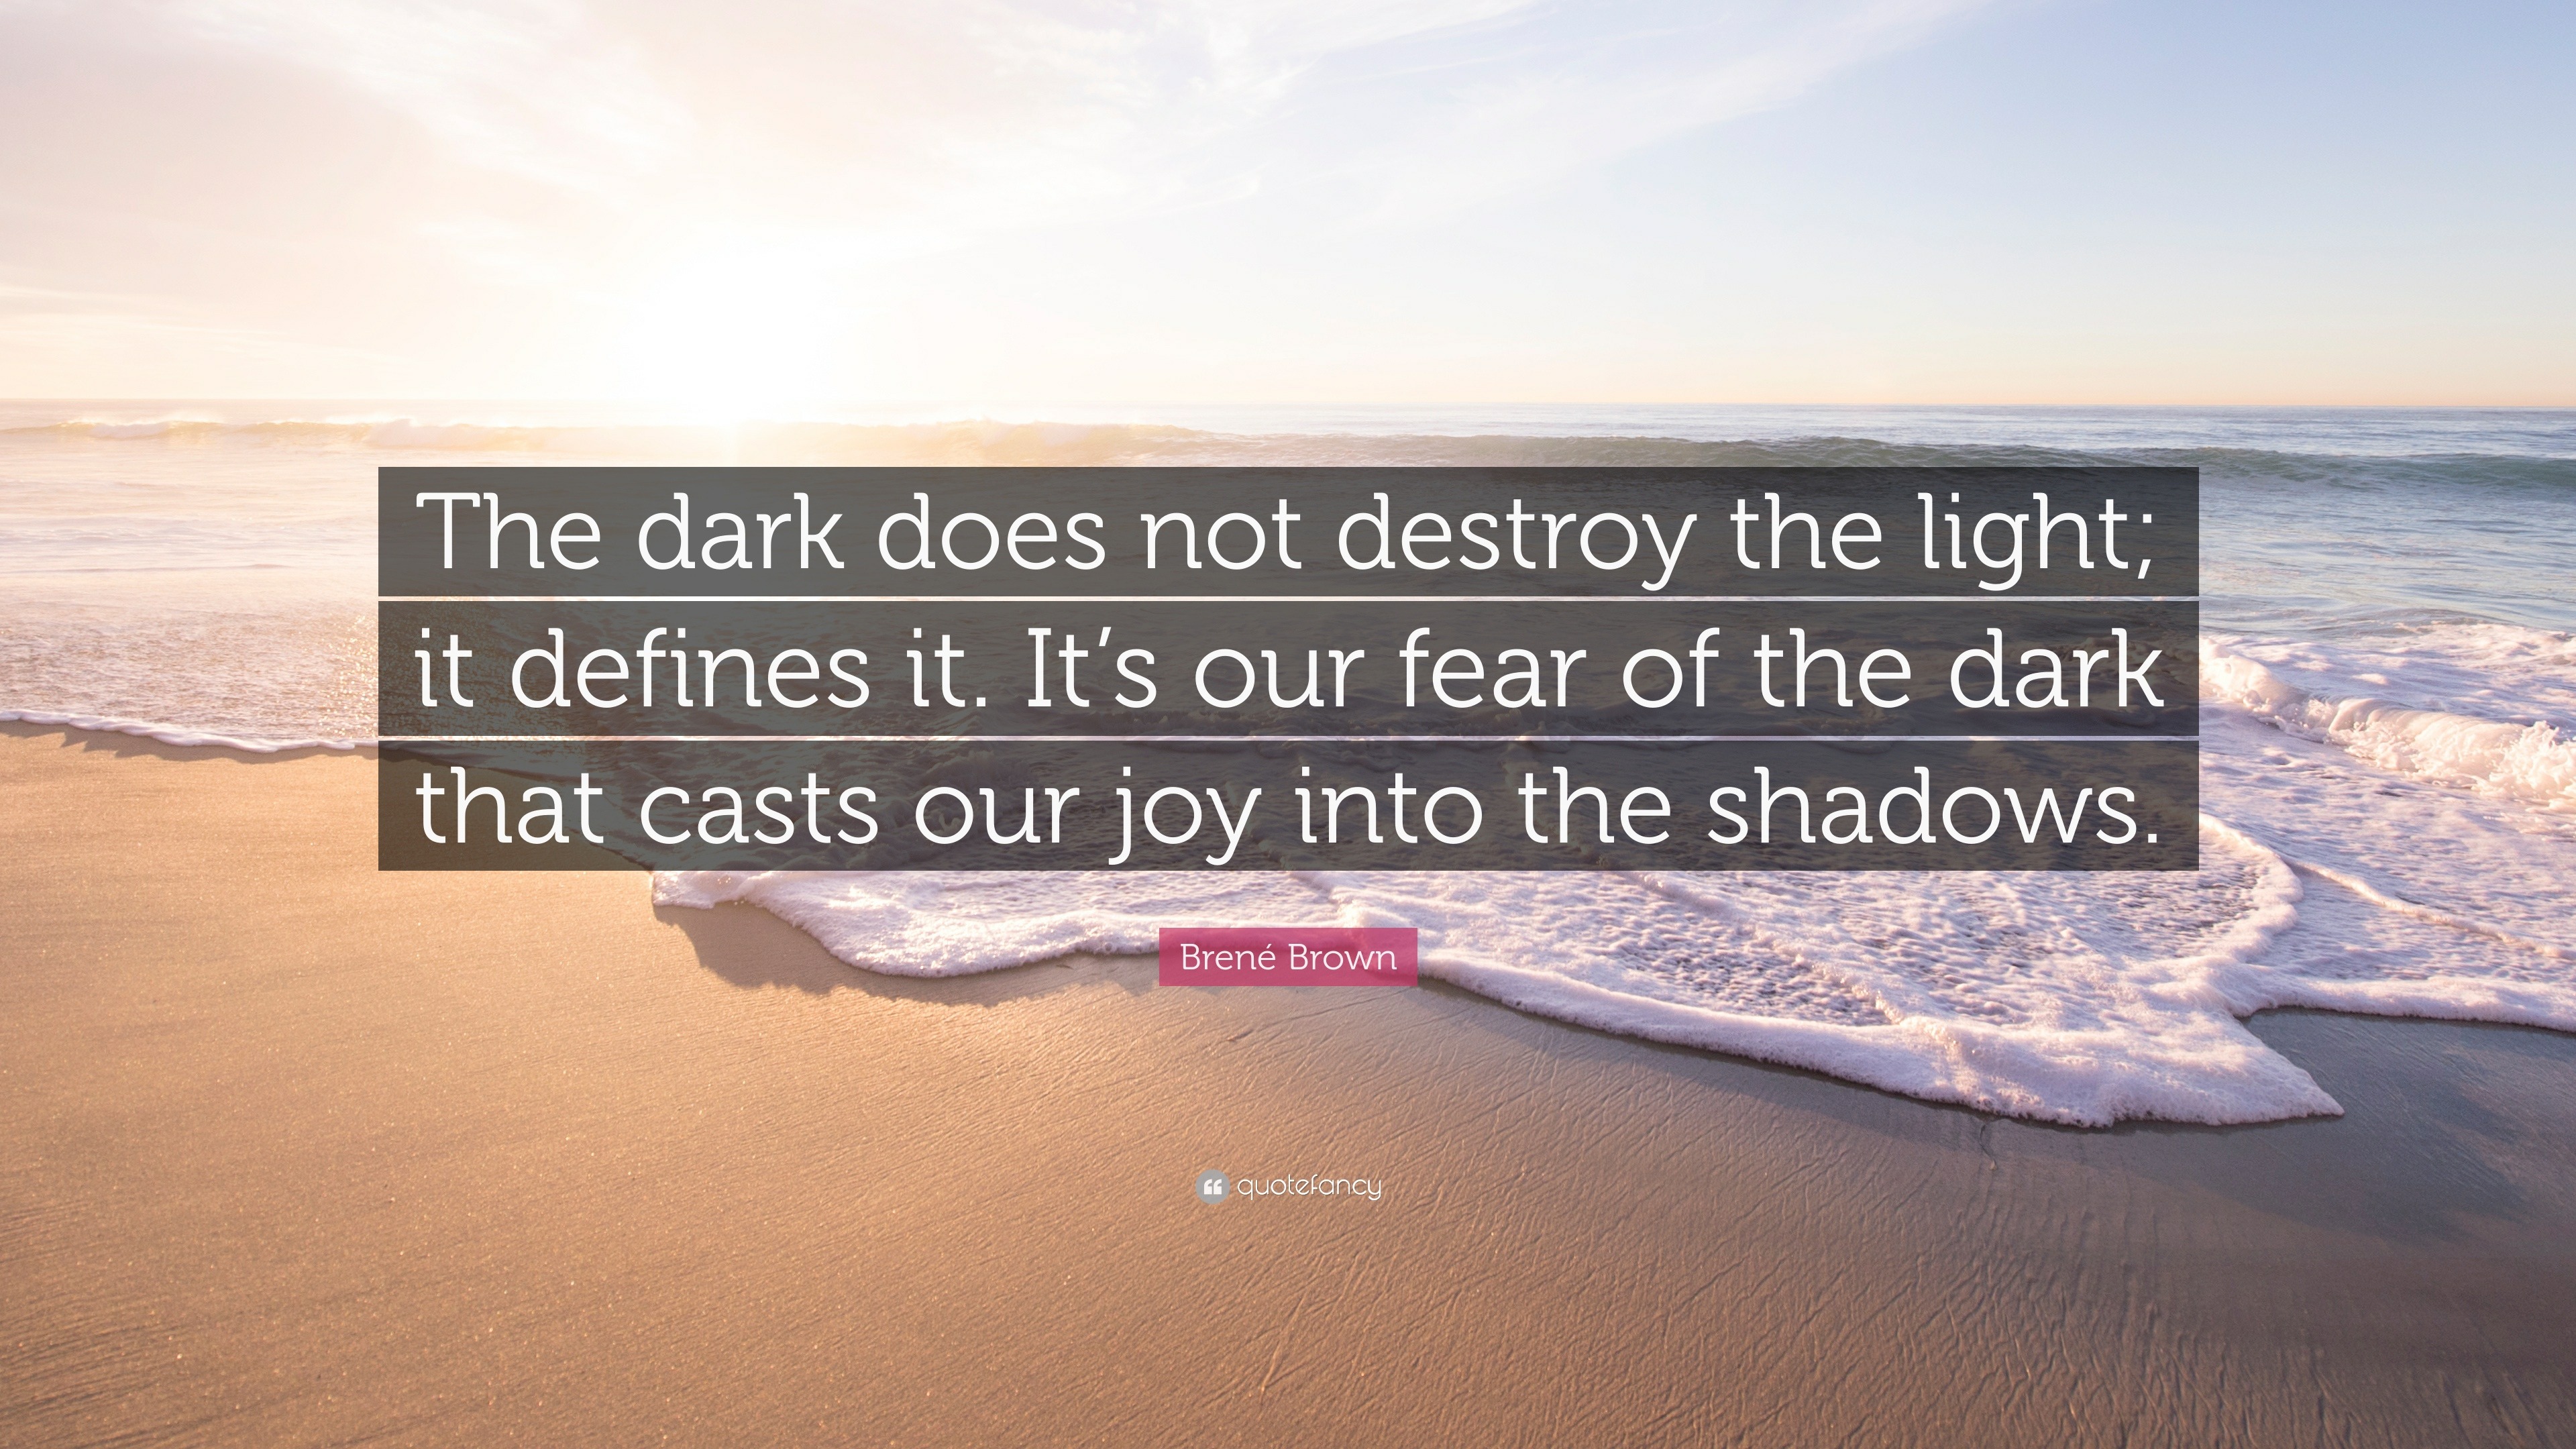 Brené Brown Quote: “The dark does not destroy the light; it defines it ...